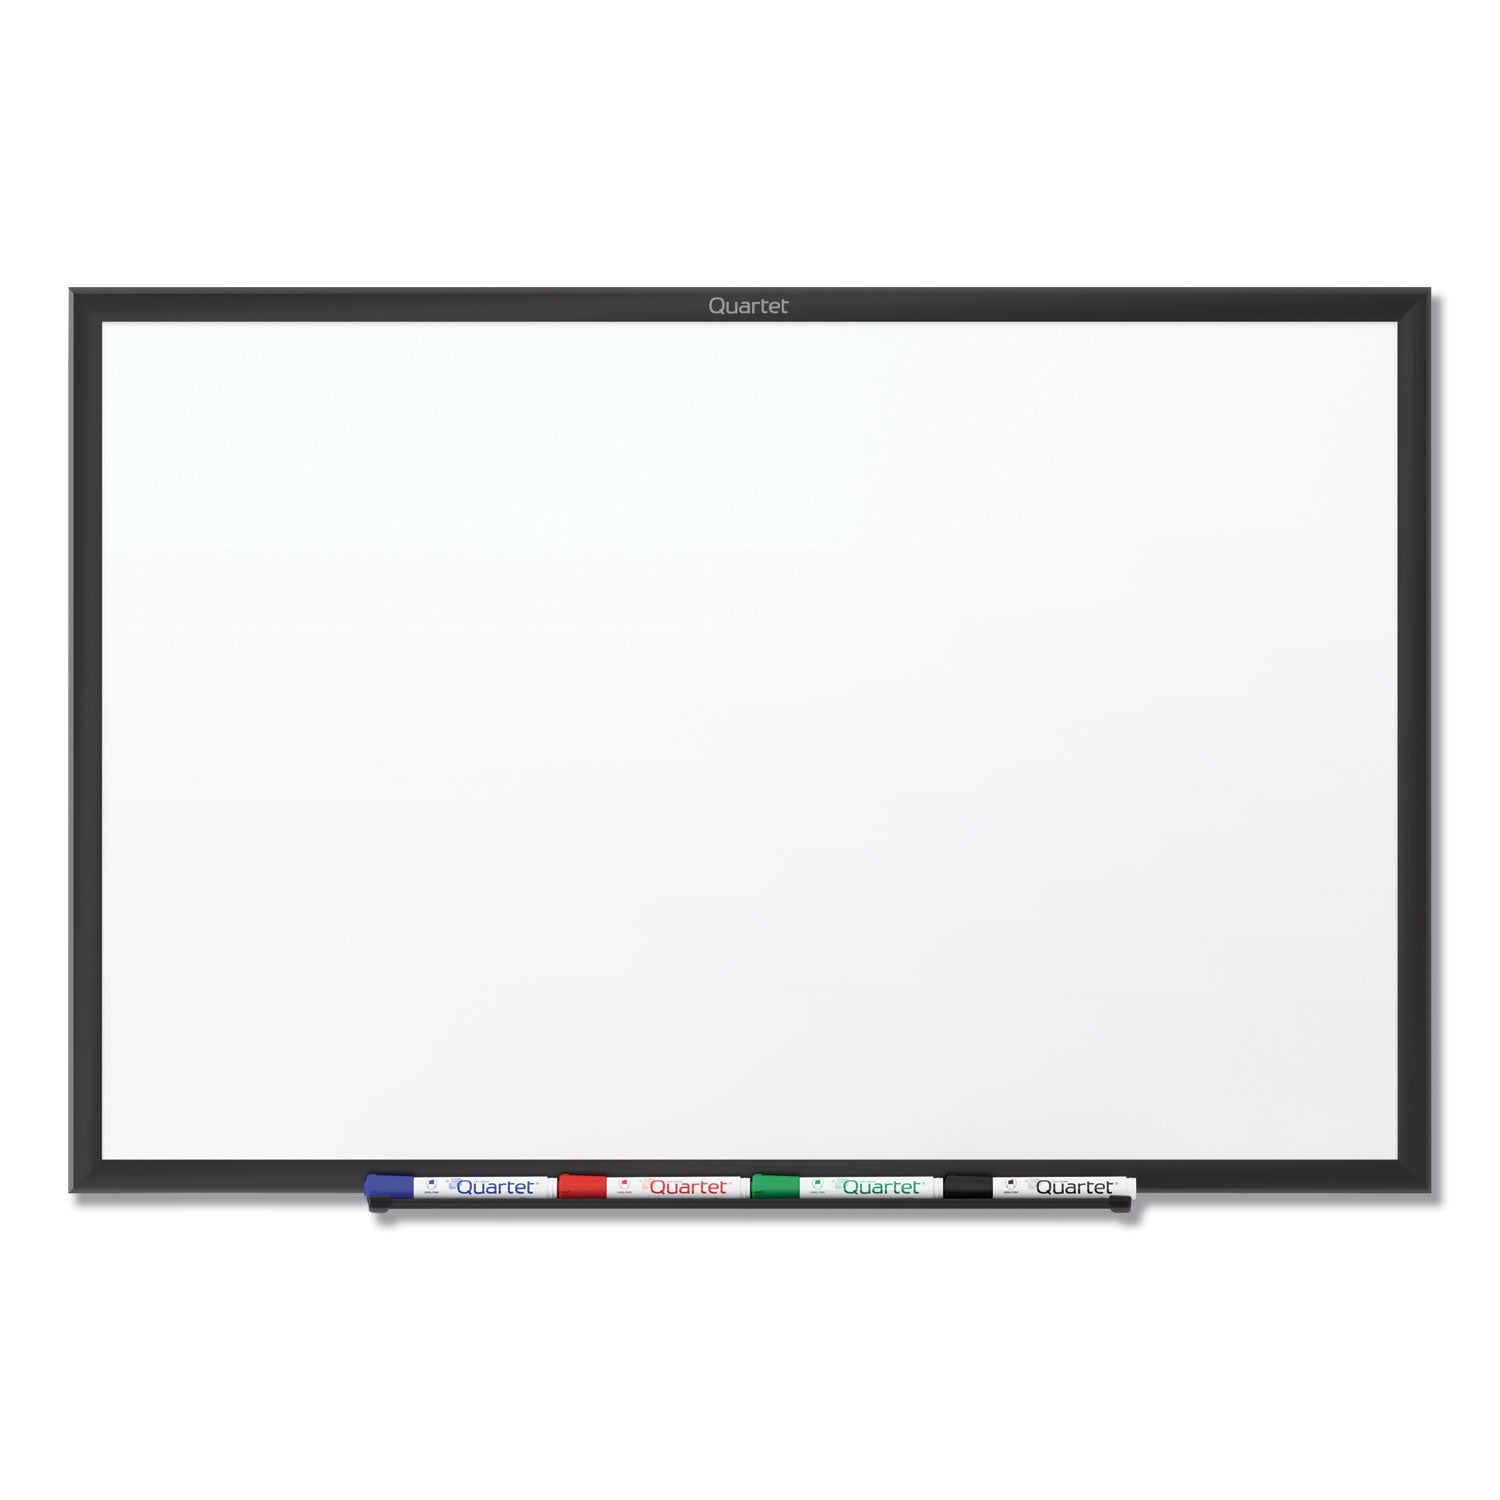 Classic Series Total Erase Dry Erase Boards, 48 x 36, White Surface, Black Aluminum Frame - 